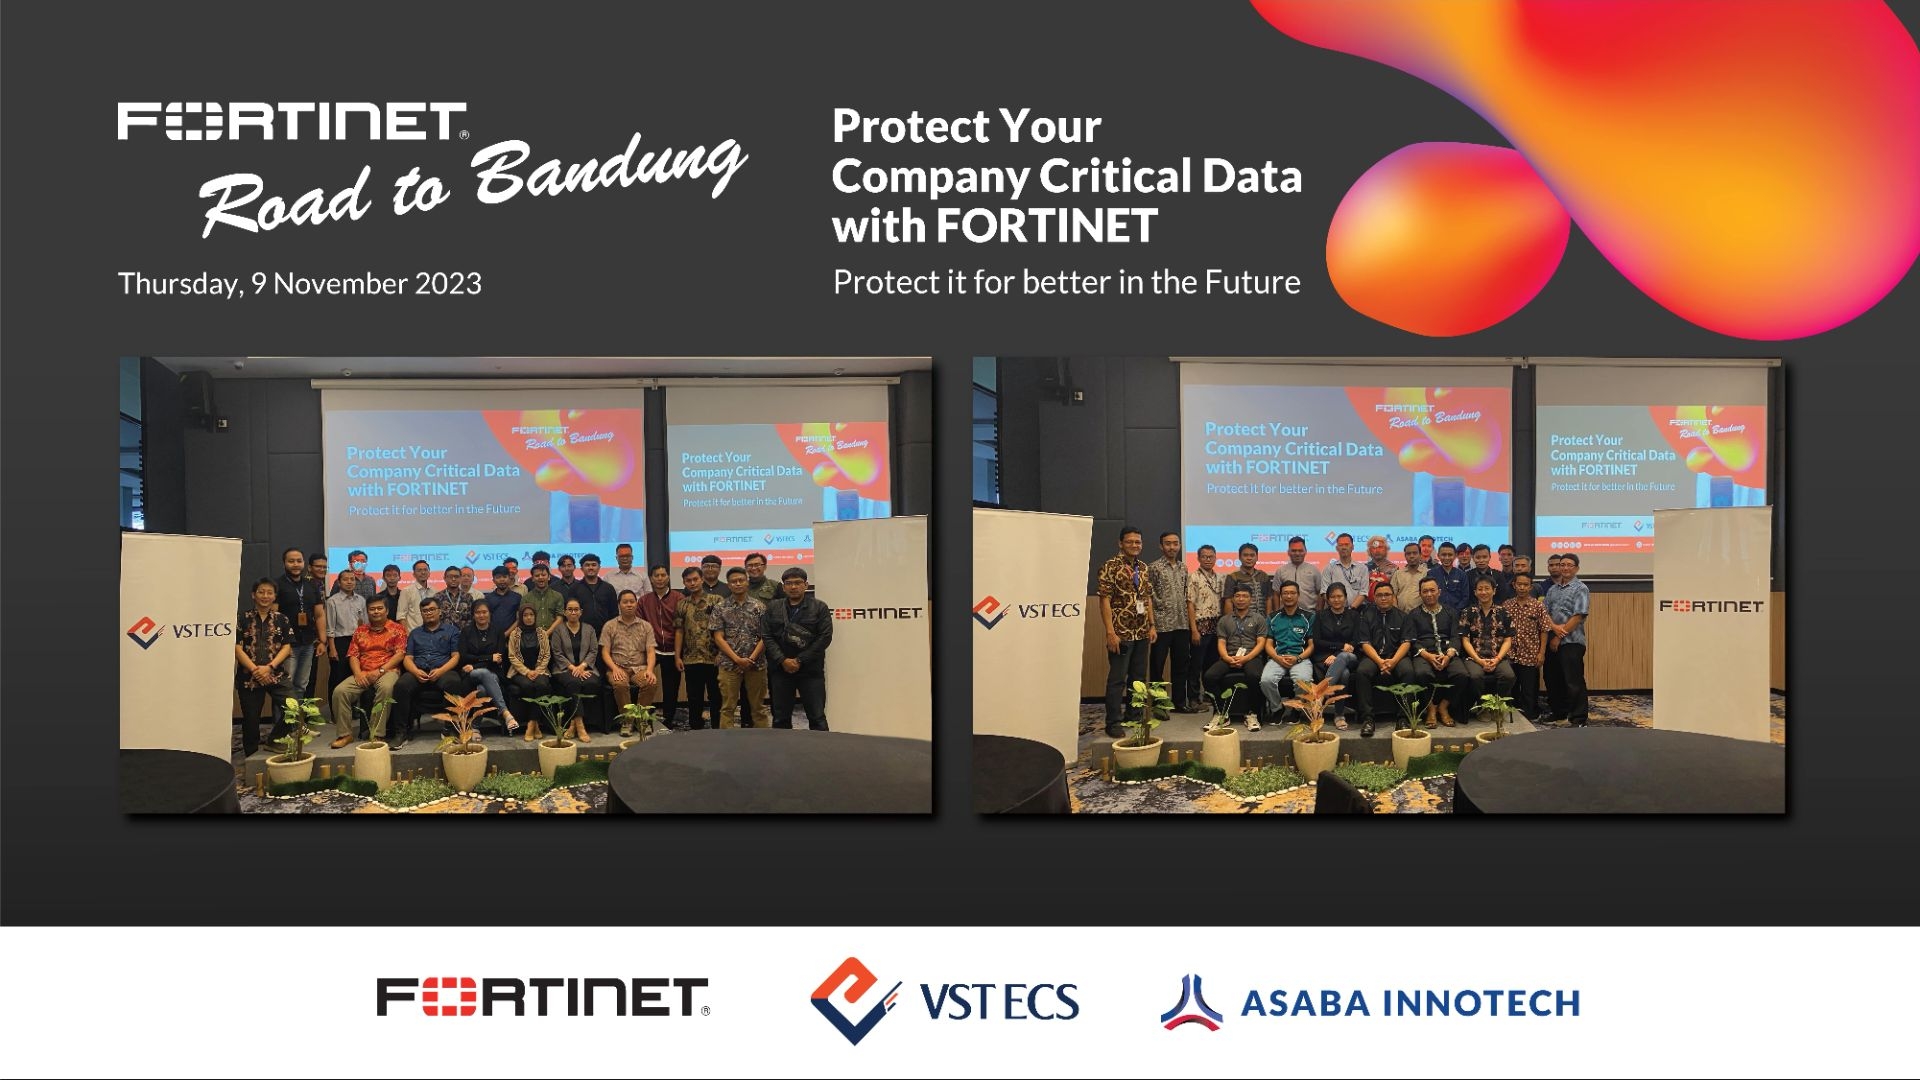 FORTINET Road To Bandung - Protect Your Company Critial Data with FORTINET